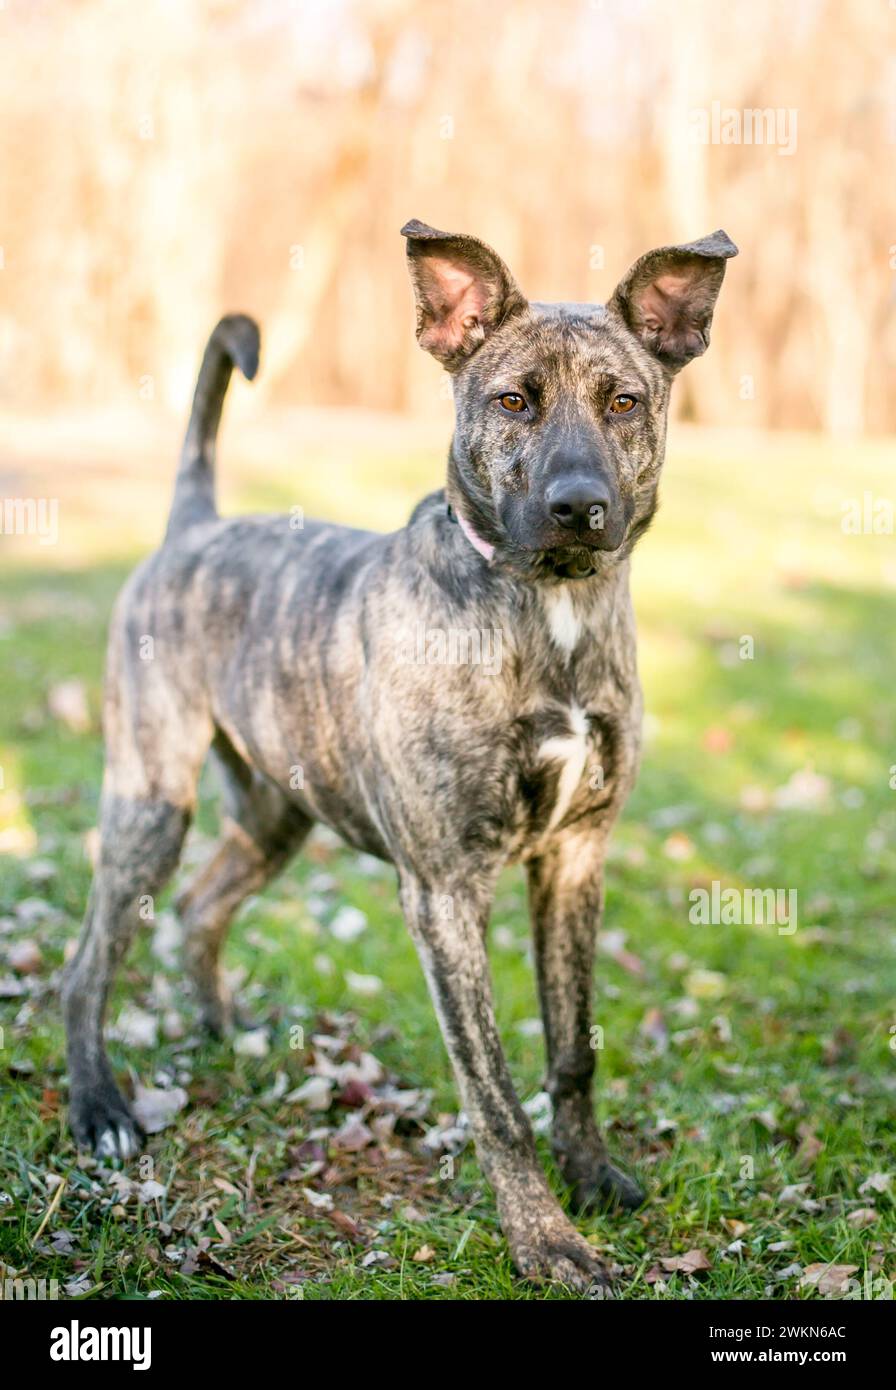 A Dutch Shepherd mixed breed dog with large ears standing outdoors Stock Photo